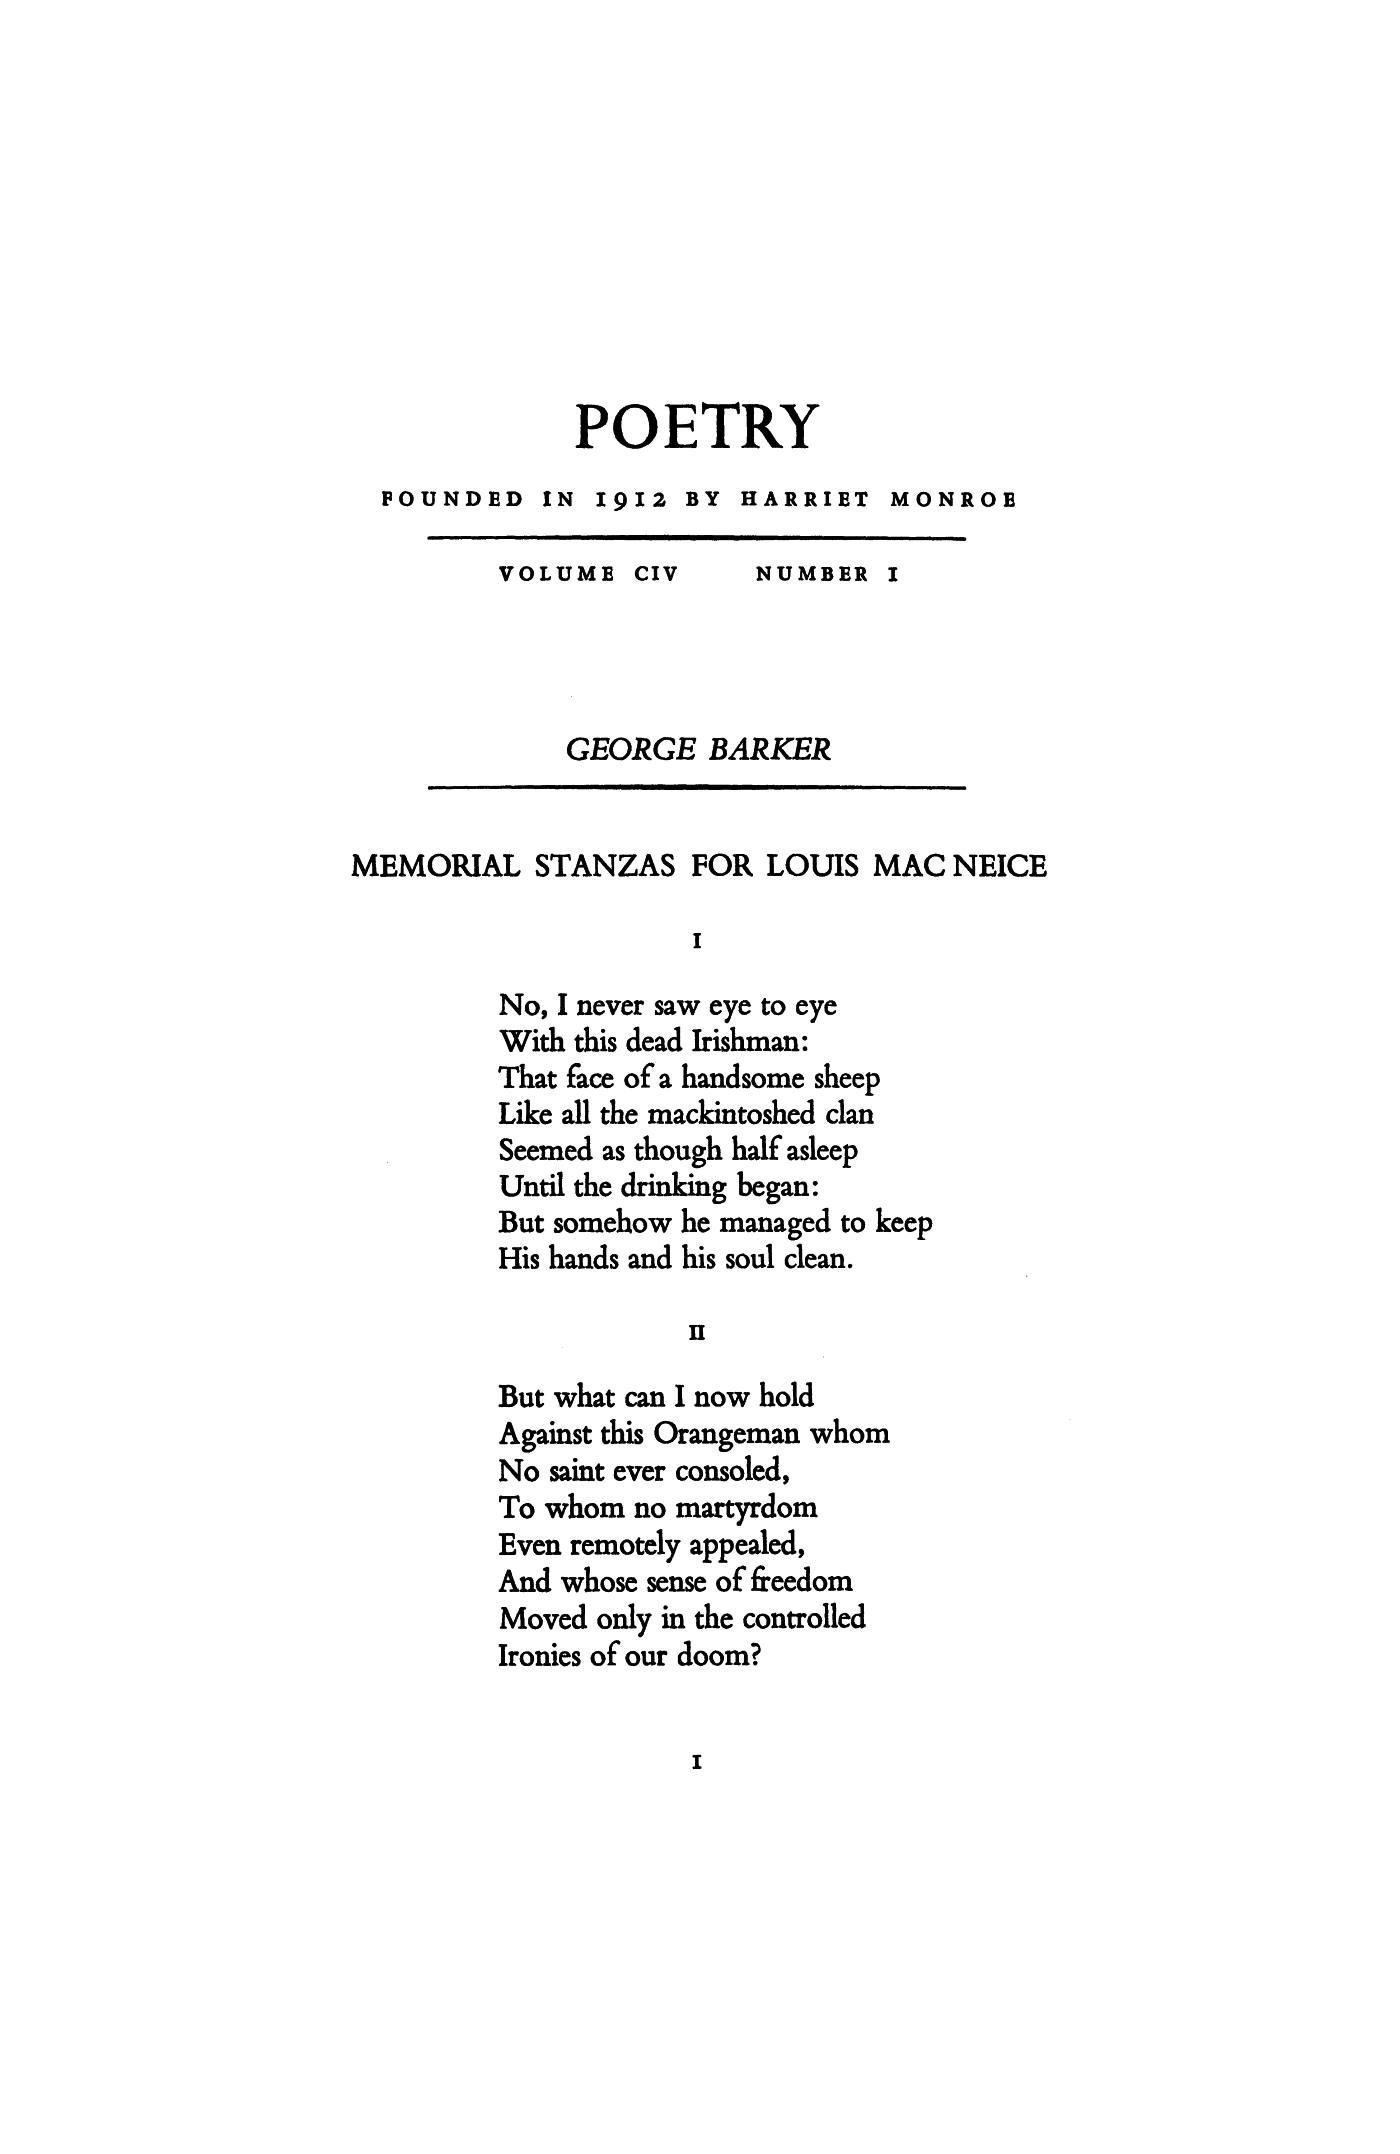 Memorial Stanzas For Louis Macneice By George Barker Poetry Magazine